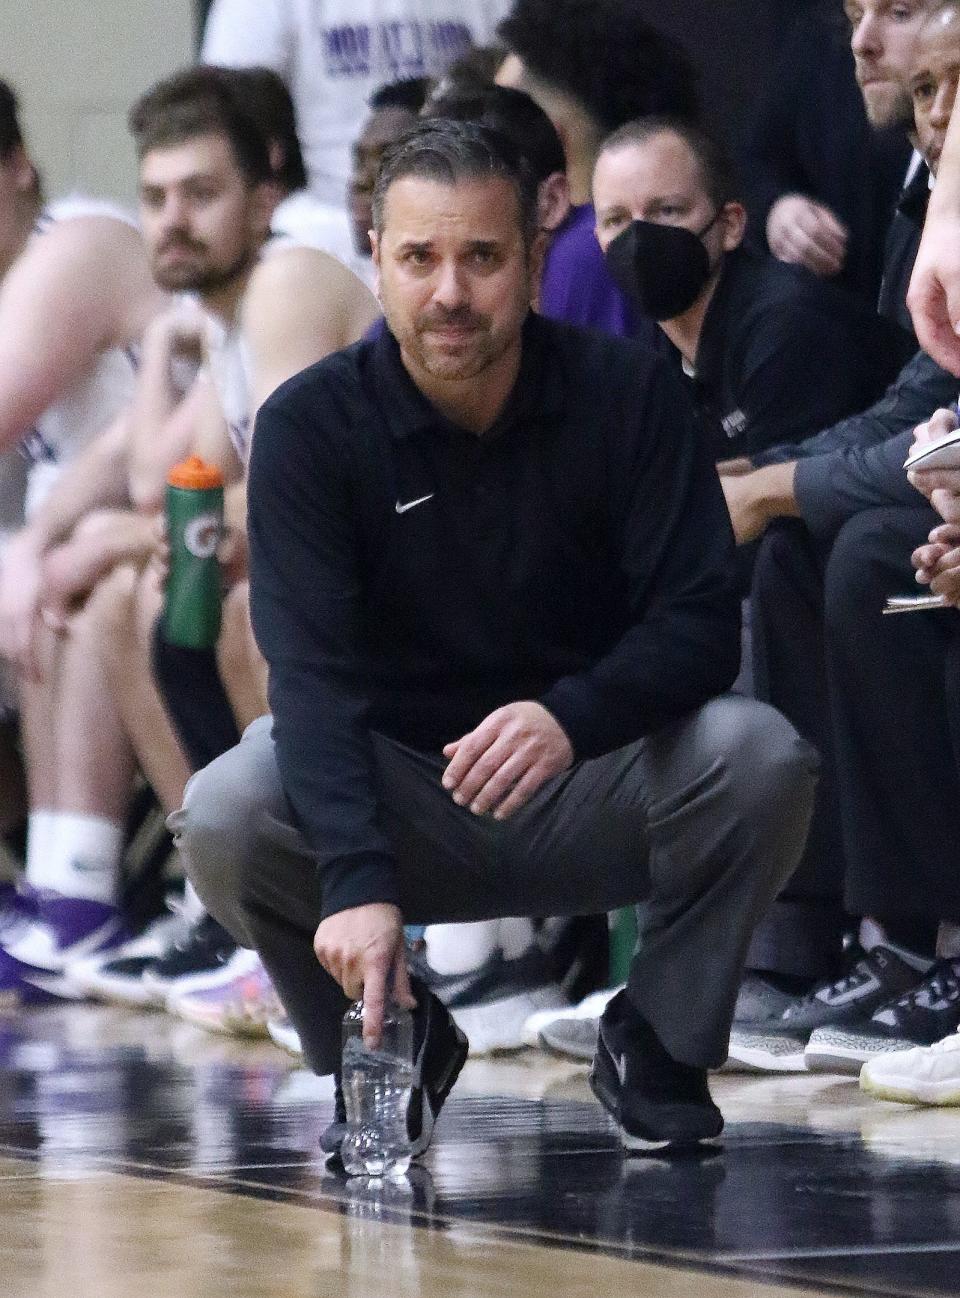 Mount Union men's basketball coach Mike Fuline goes for career win number 200 on Saturday when the Purple Raiders visit Heidelberg.